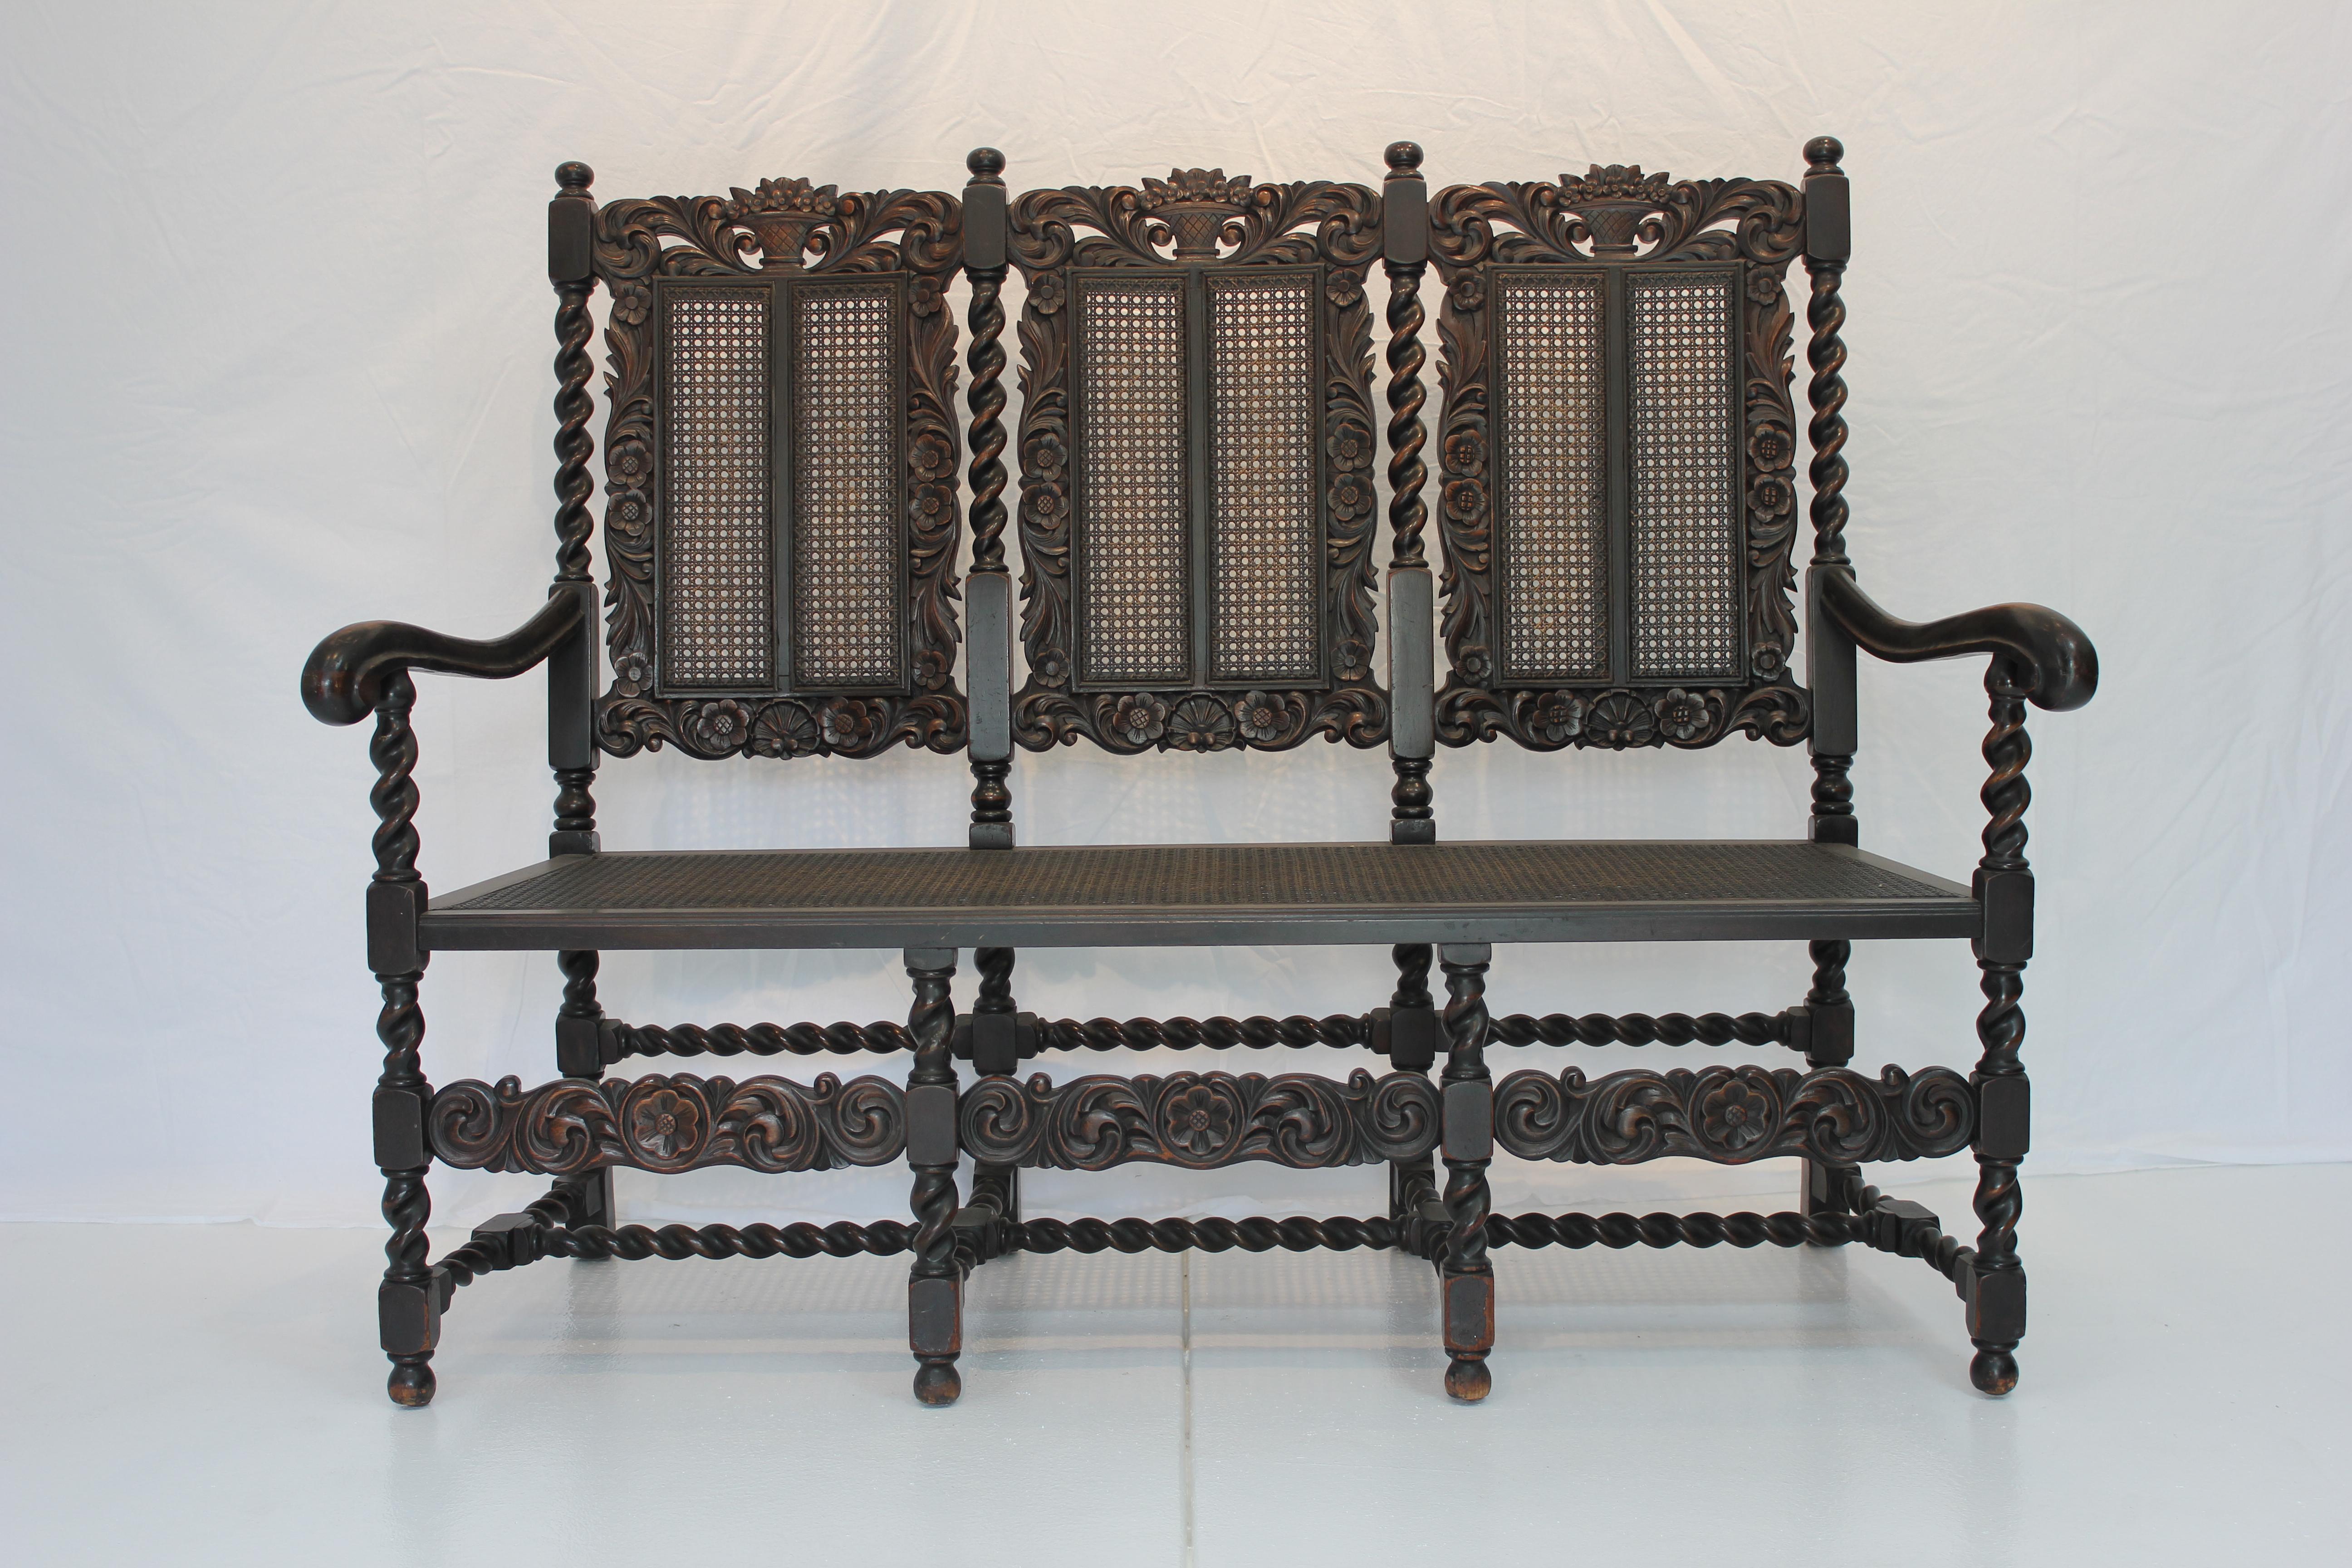 Late 19th Century Heavily Carved Oak English Jacobean Style Settee with Barley Twist legs, stretchers and supports. Caned seat and back.